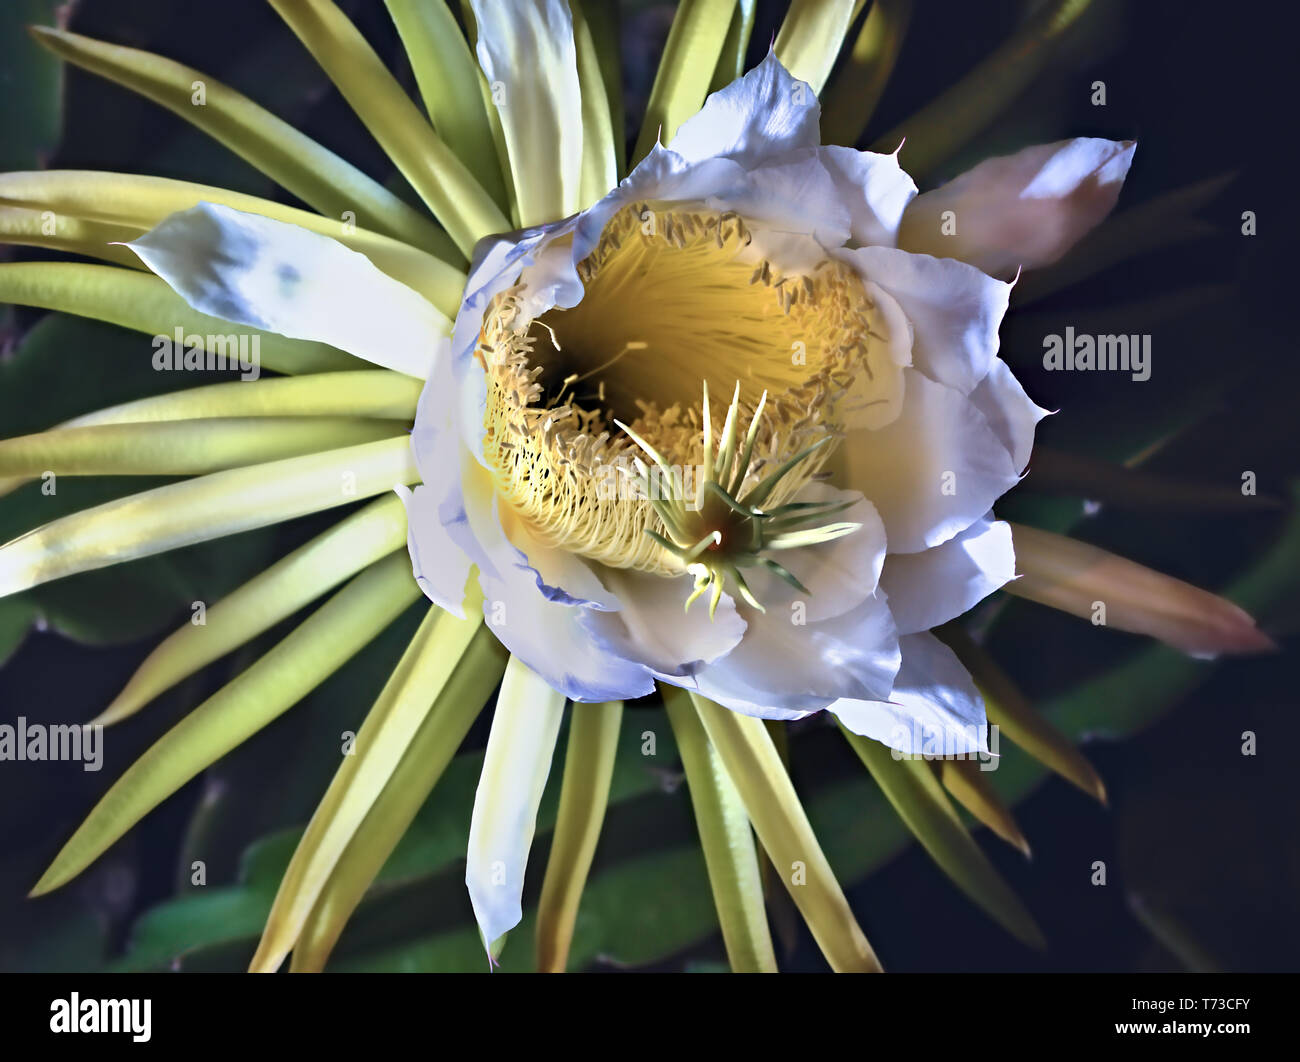 The individual flowers have only a lifespan of a few hours, the queen of the night, Harrisia Pomanensis, blooms at night, here is a large open flower Stock Photo